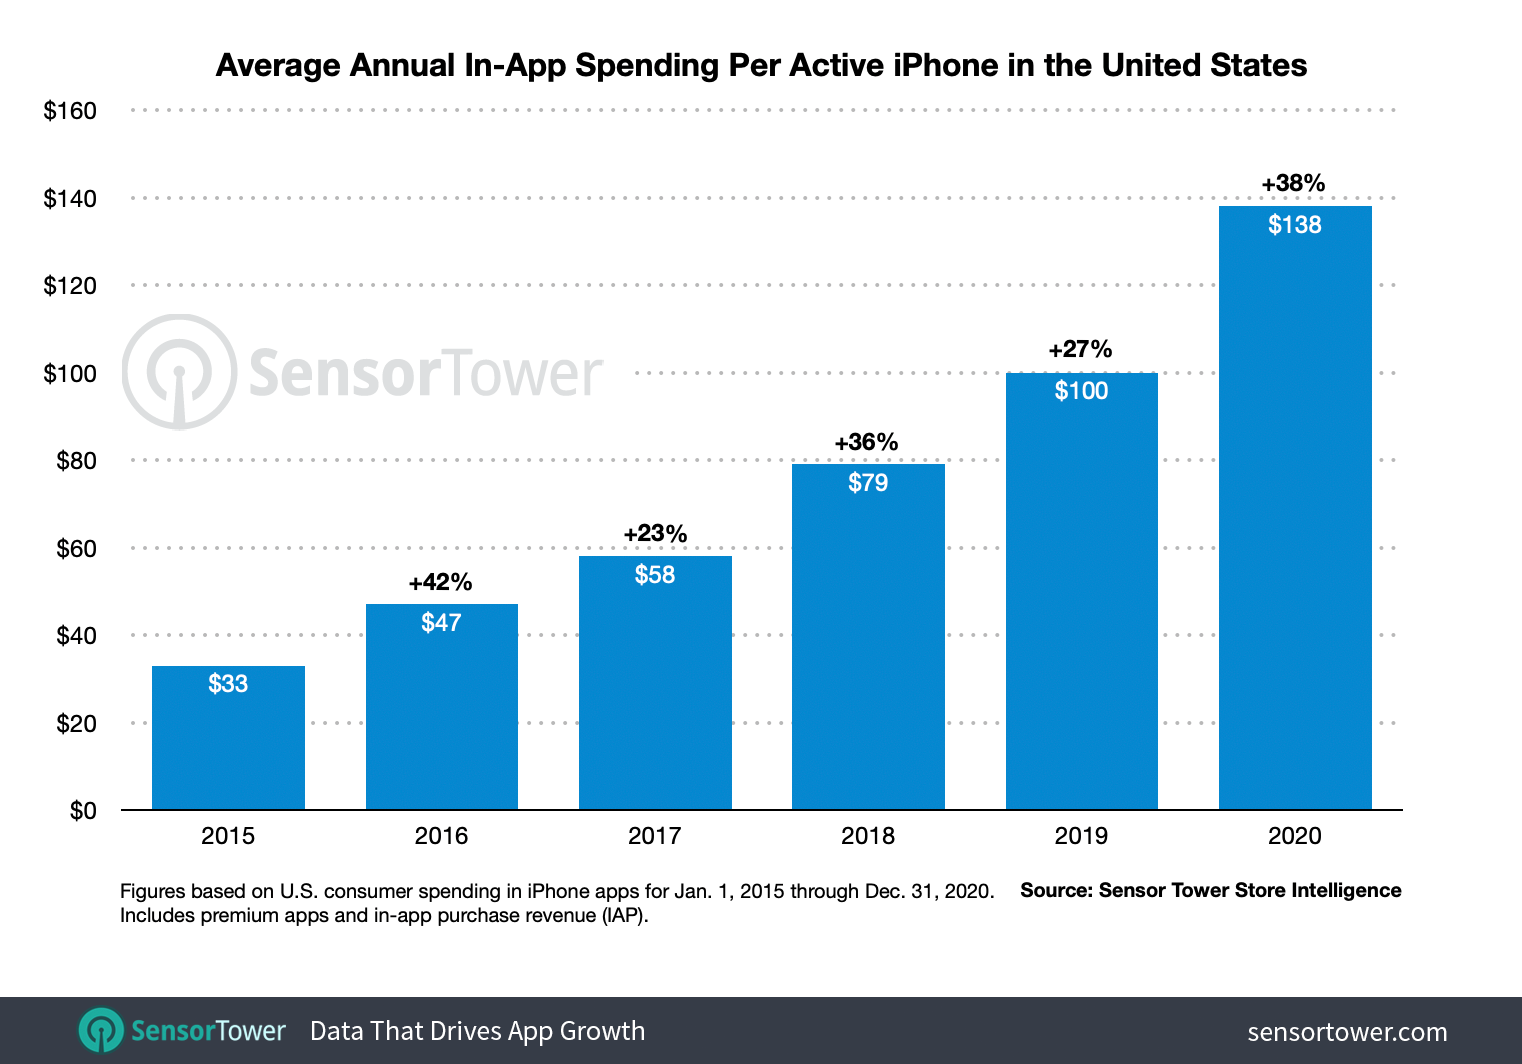 2020 year-over-year growth in the average annual in-app spending per active U.S. iPhone exceeded growth seen in 2019.